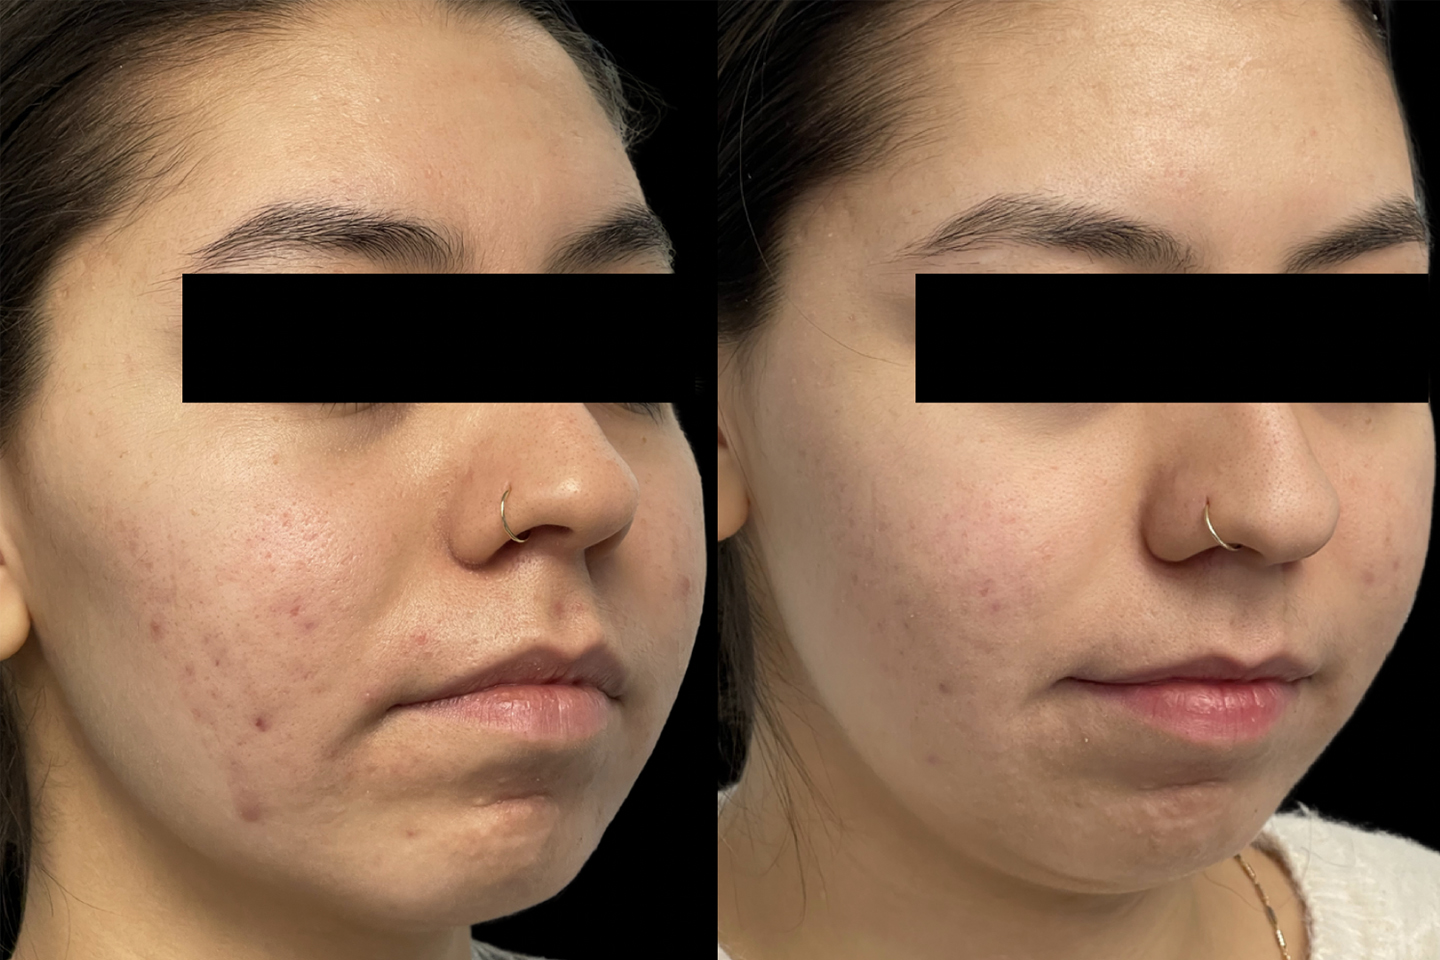 Image of before and 2 weeks post 2 treatments